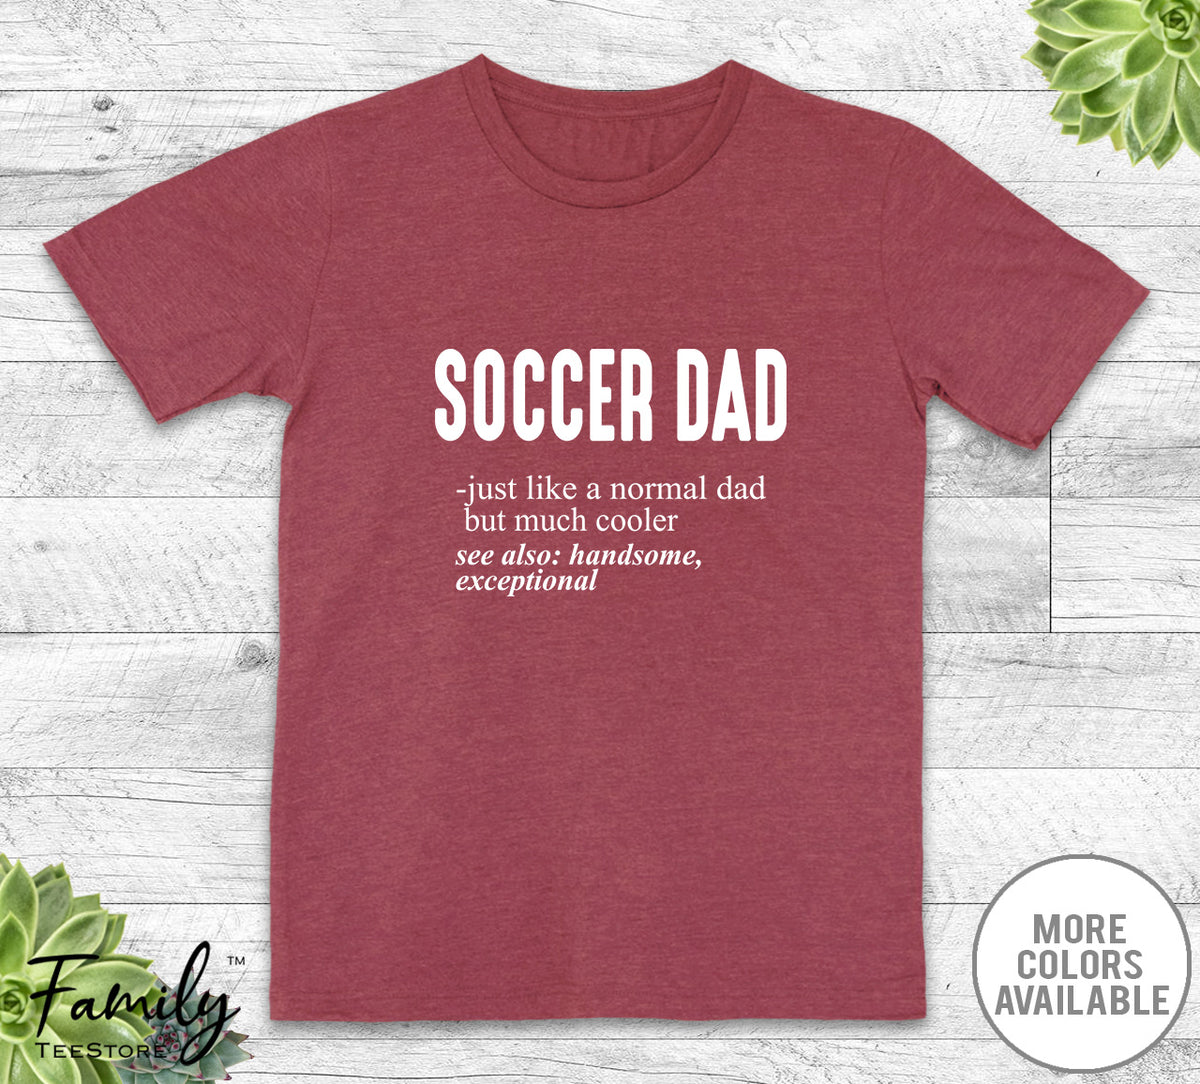 Soccer Dad Just Like A Normal Dad - Unisex T-shirt - Soccer Shirt - Soccer Dad Gift - familyteeprints